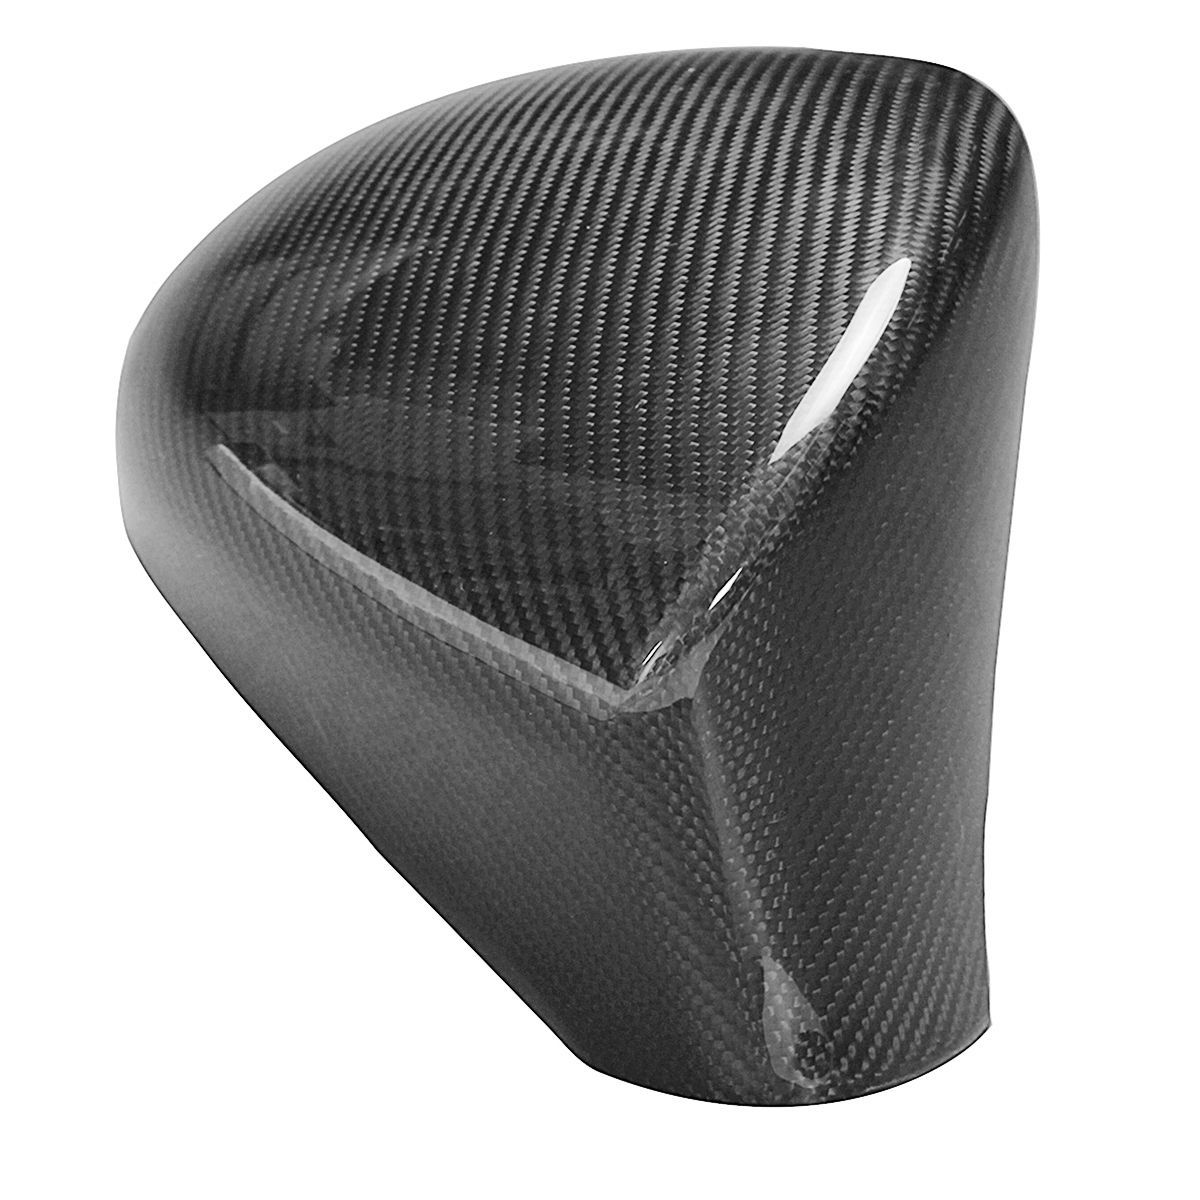 Car-Carbon-Fiber-Side-Mirror-Cover-Caps-Add-on-Pair-for-LEXUS-GS350-GS450H-GSF-2013-17-LHD-Model-1304611